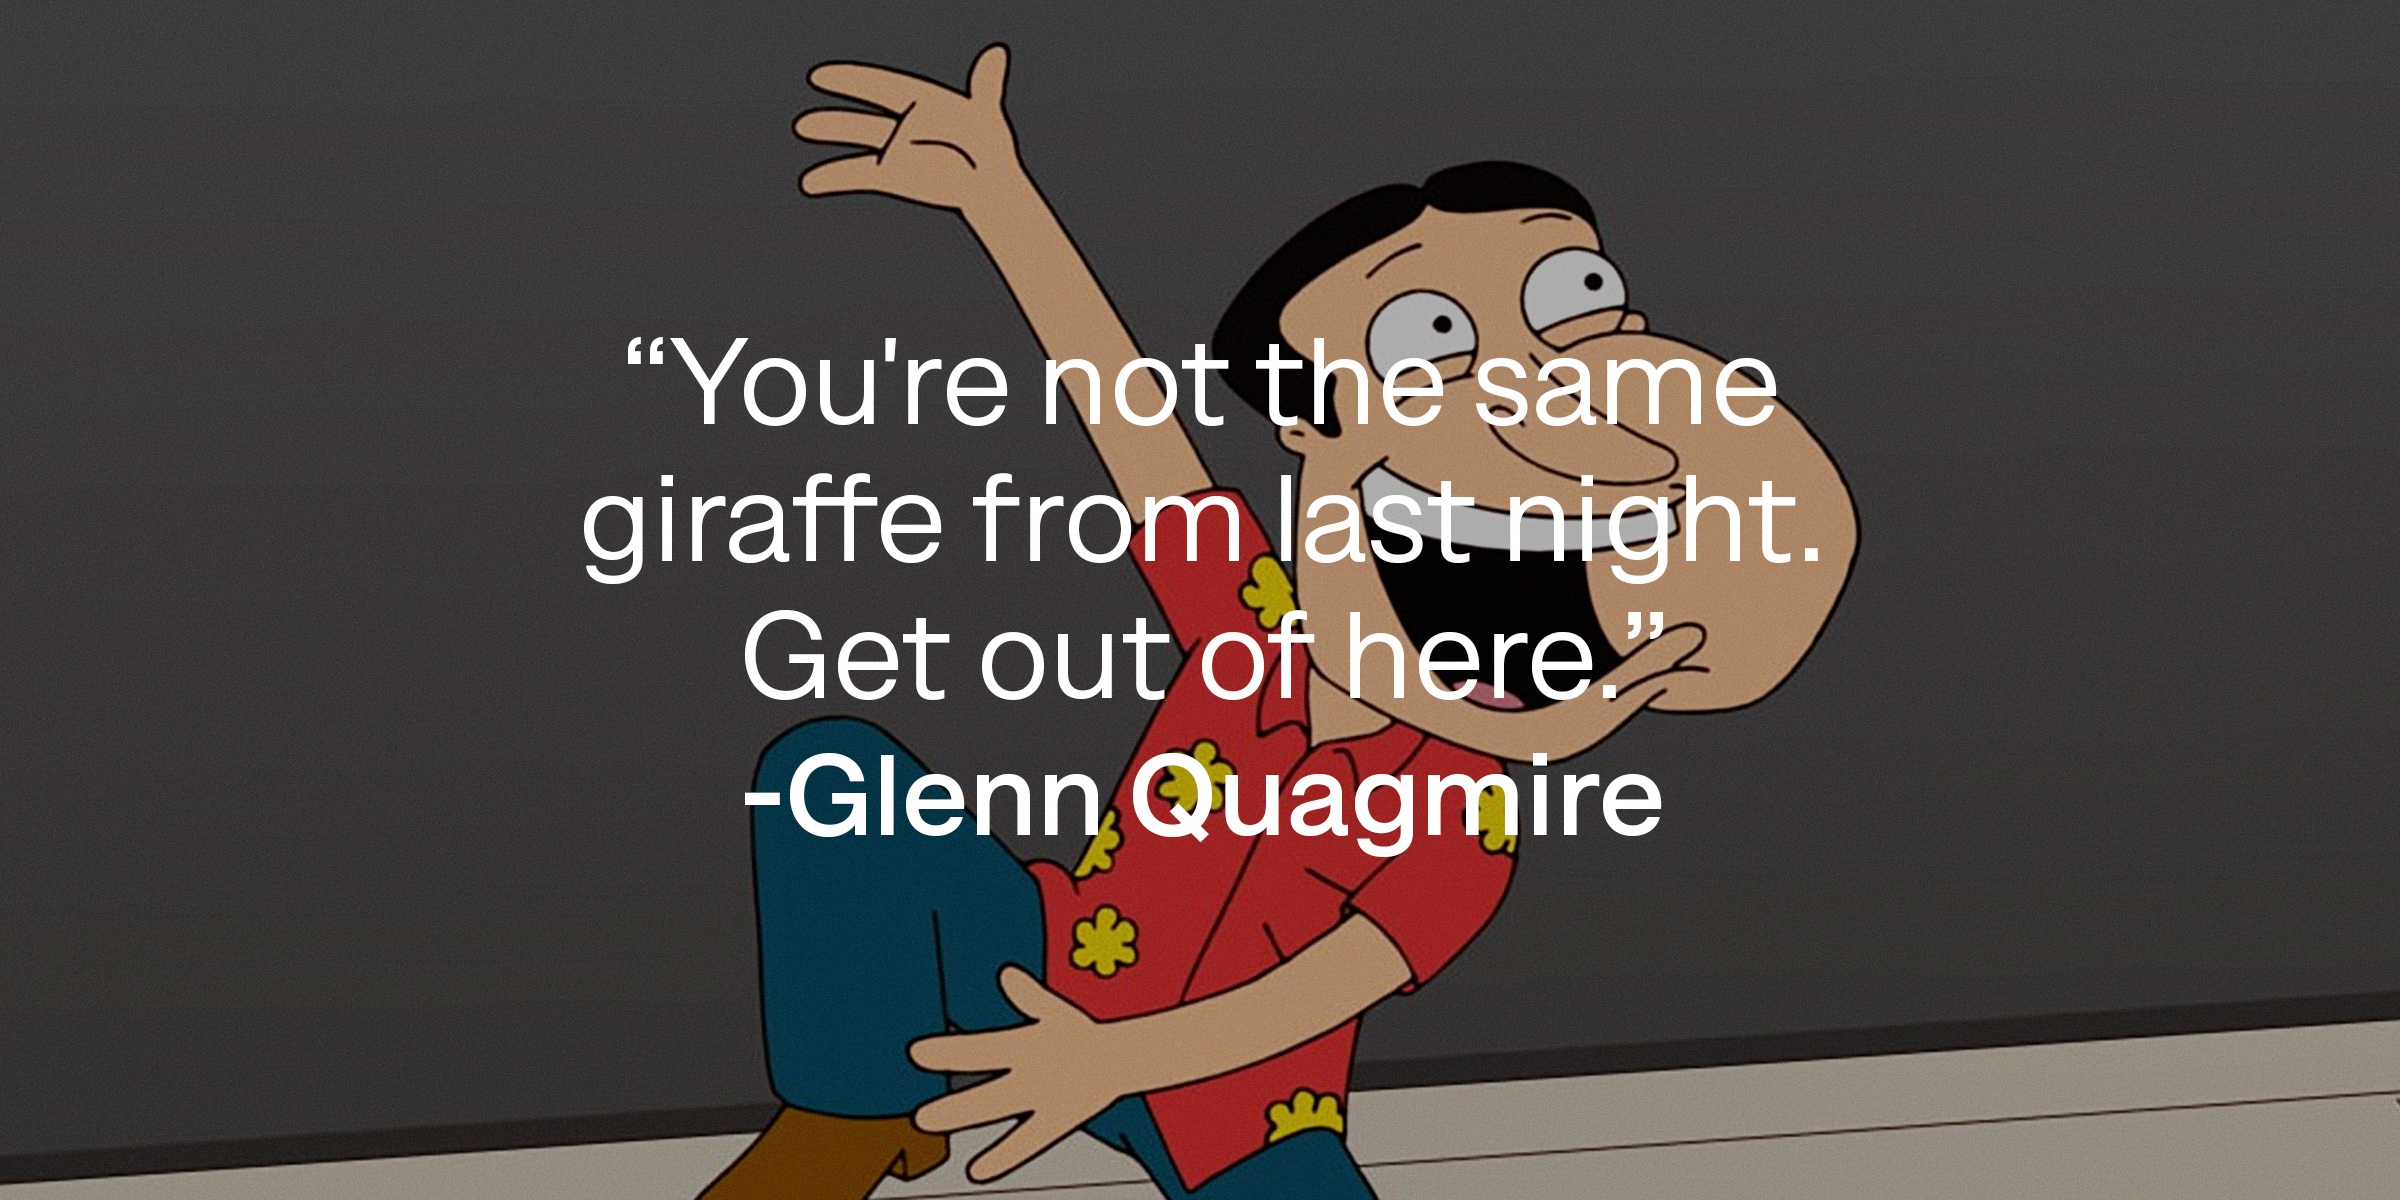 Glenn Quagmire with his quote: “You're not the same giraffe from last night. Get out of here.” | Source: facebook.com/FamilyGuy